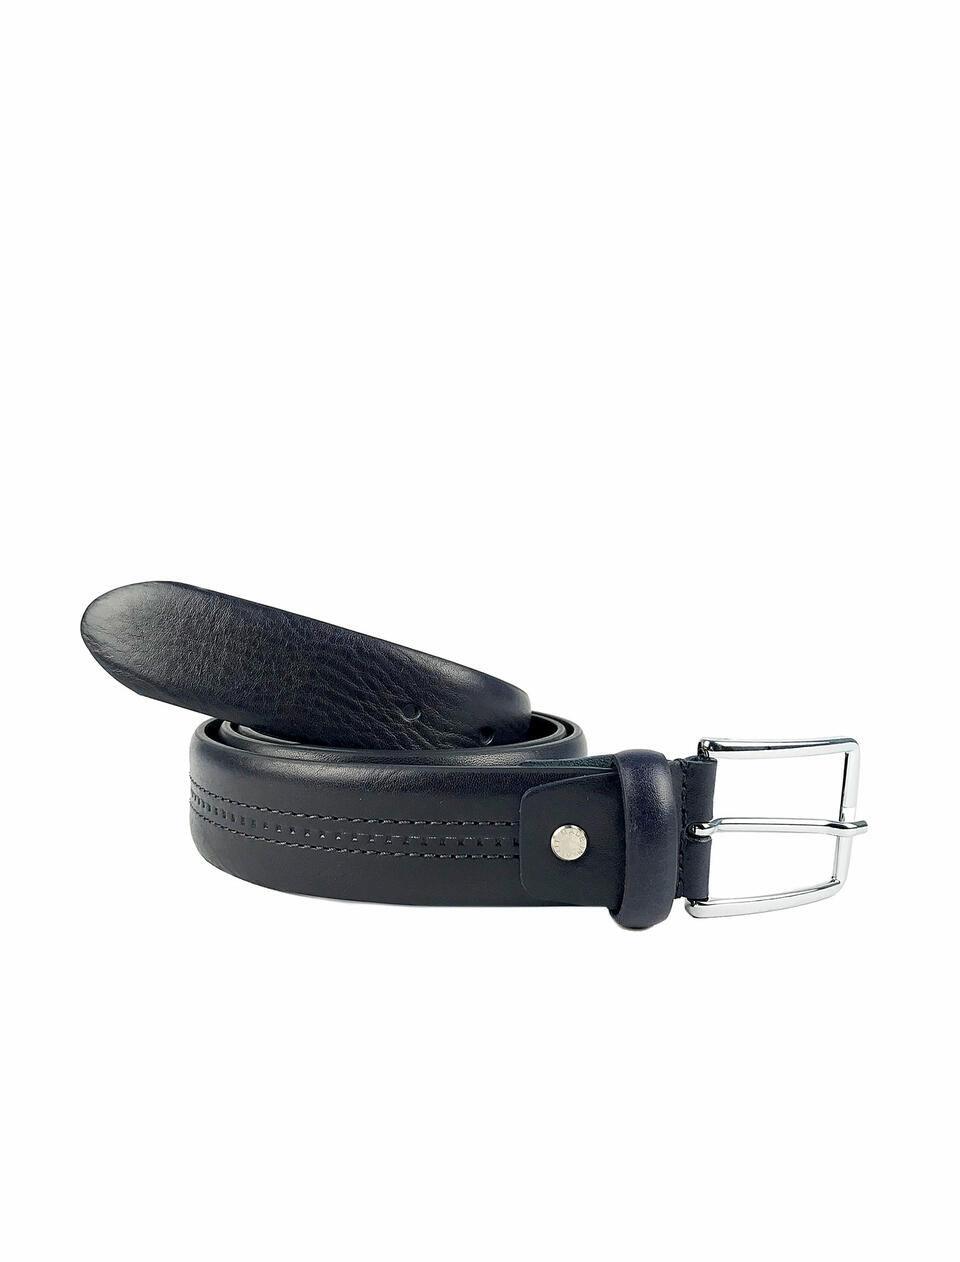 Classic leather belt with double central stitched - Men Belts | Belts BLU - Men Belts | BeltsCuoieria Fiorentina